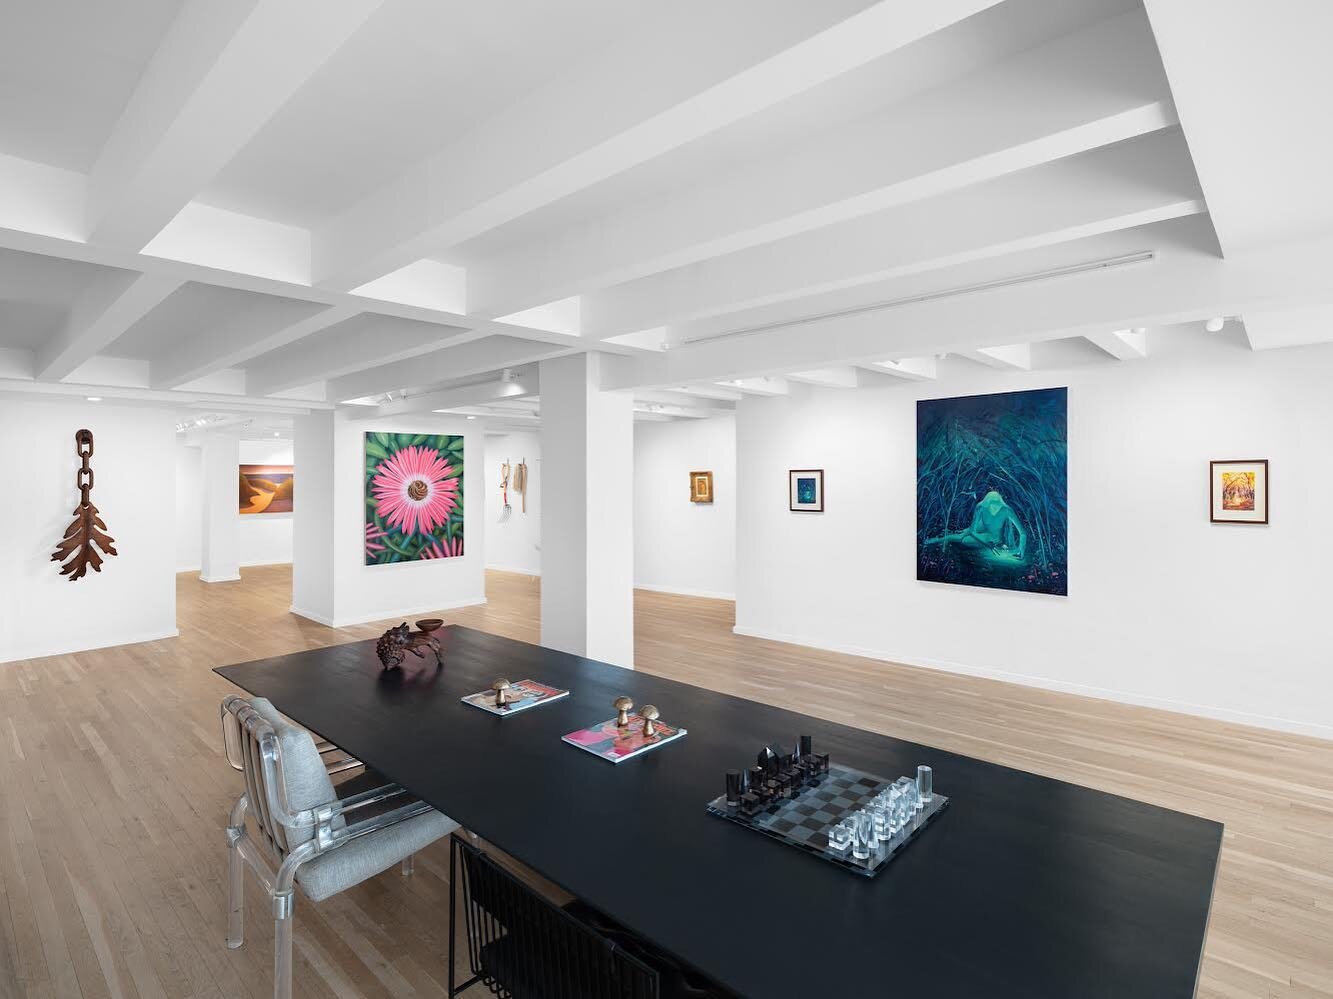 installation view of &ldquo;First Impression&rdquo;
&bull;
&bull;
&bull;
&bull;
All of the artists in this show are making their debut appearance at Room 57 among our diverse roster. In terms of subject matter, the work offers a present-day twist on 